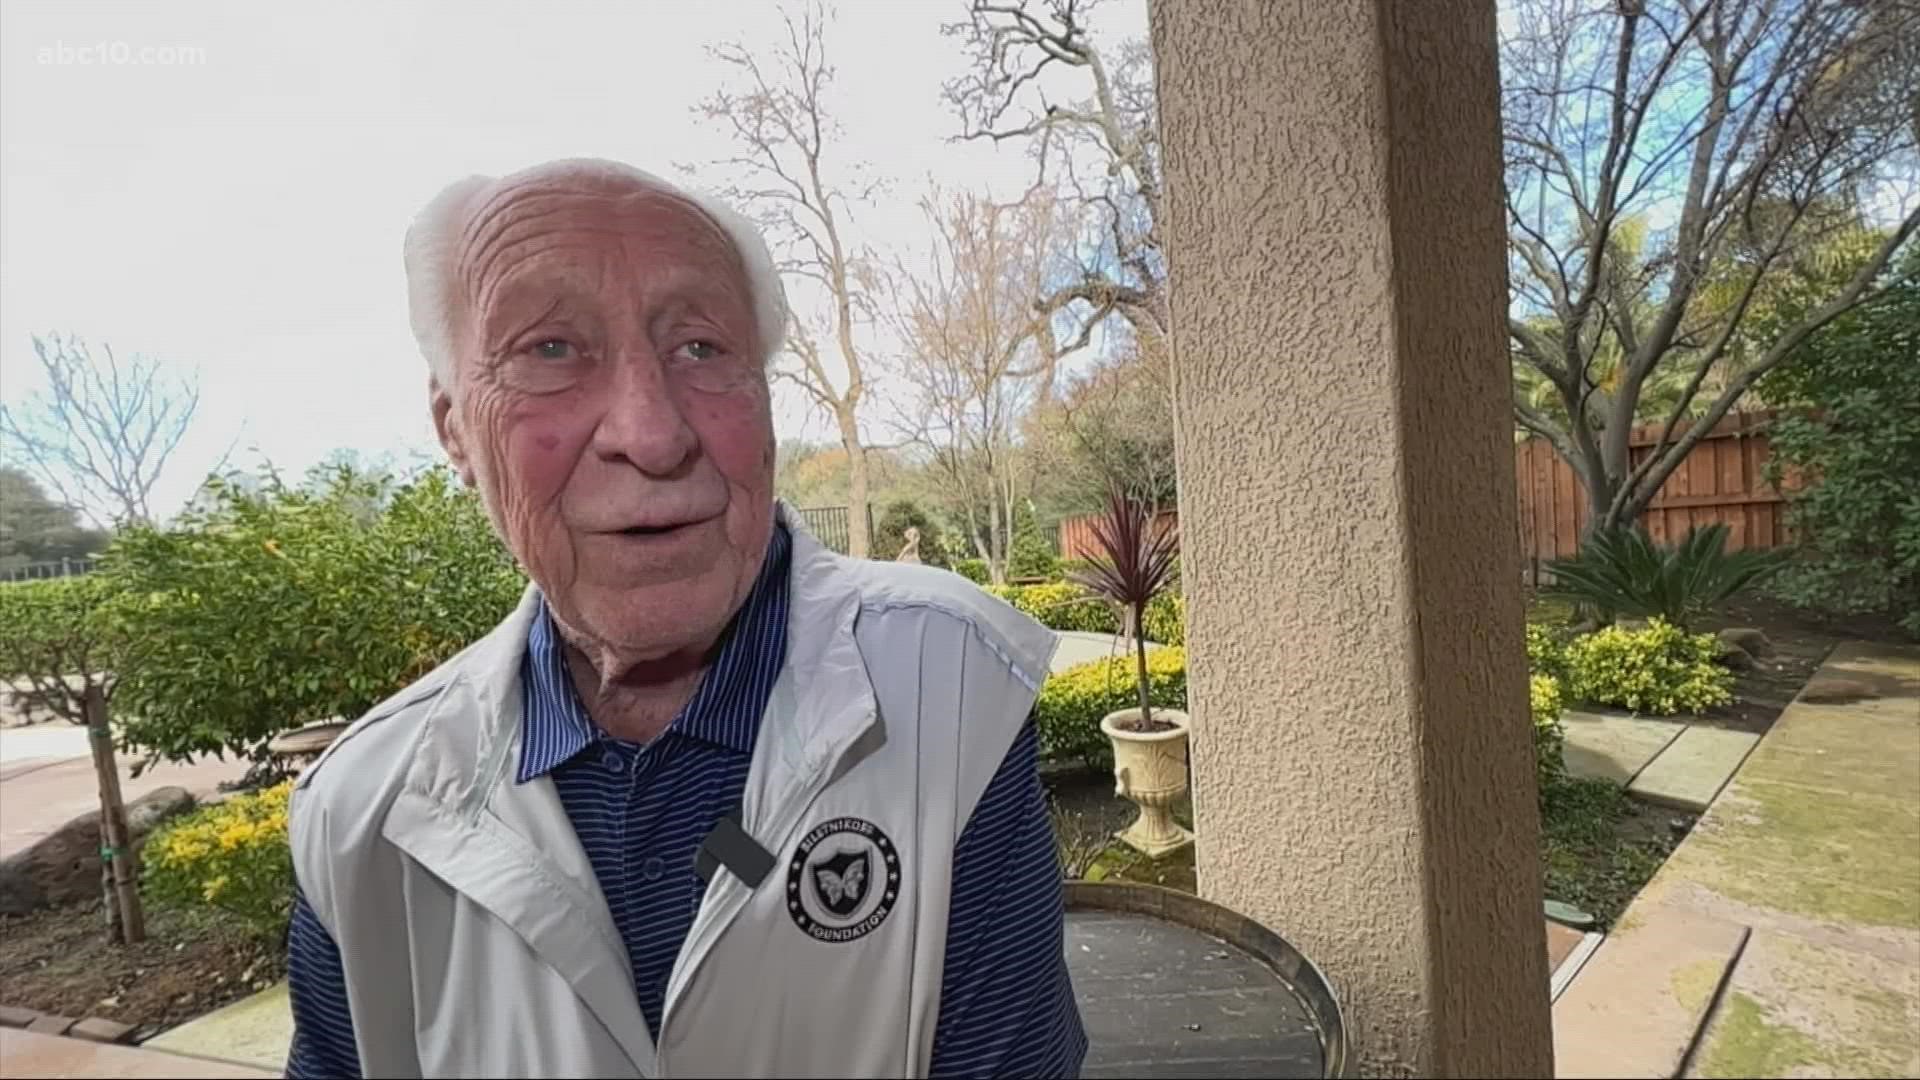 Our Mark S. Allen caught up with Oakland Raider Fred Biletnikoff before heading out to the Big Game, and asked him how he feels being a part of NFL history.